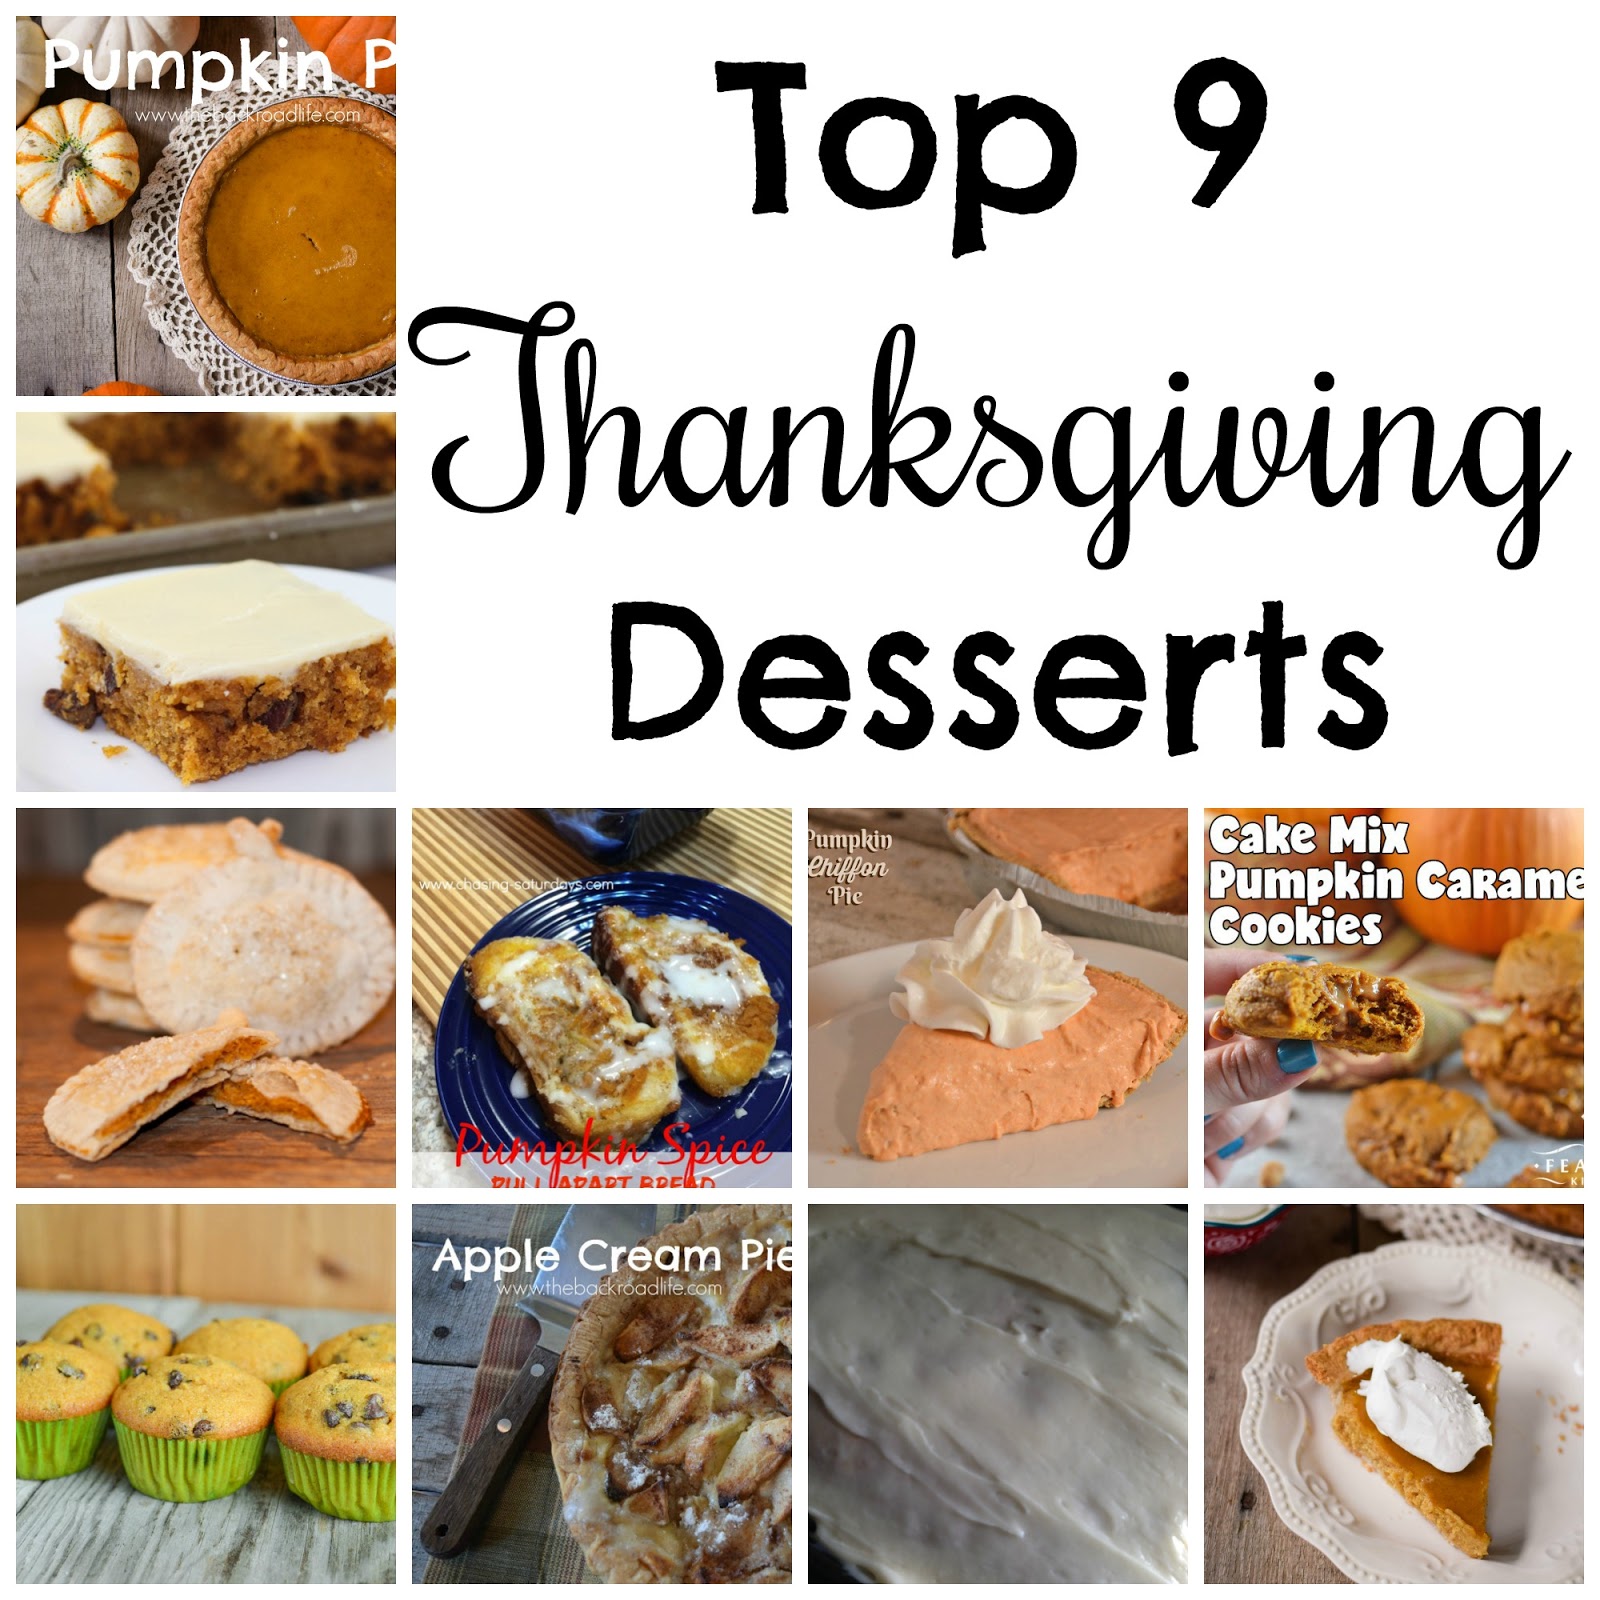 The Backroad Life: Top 9 Thanksgiving Desserts